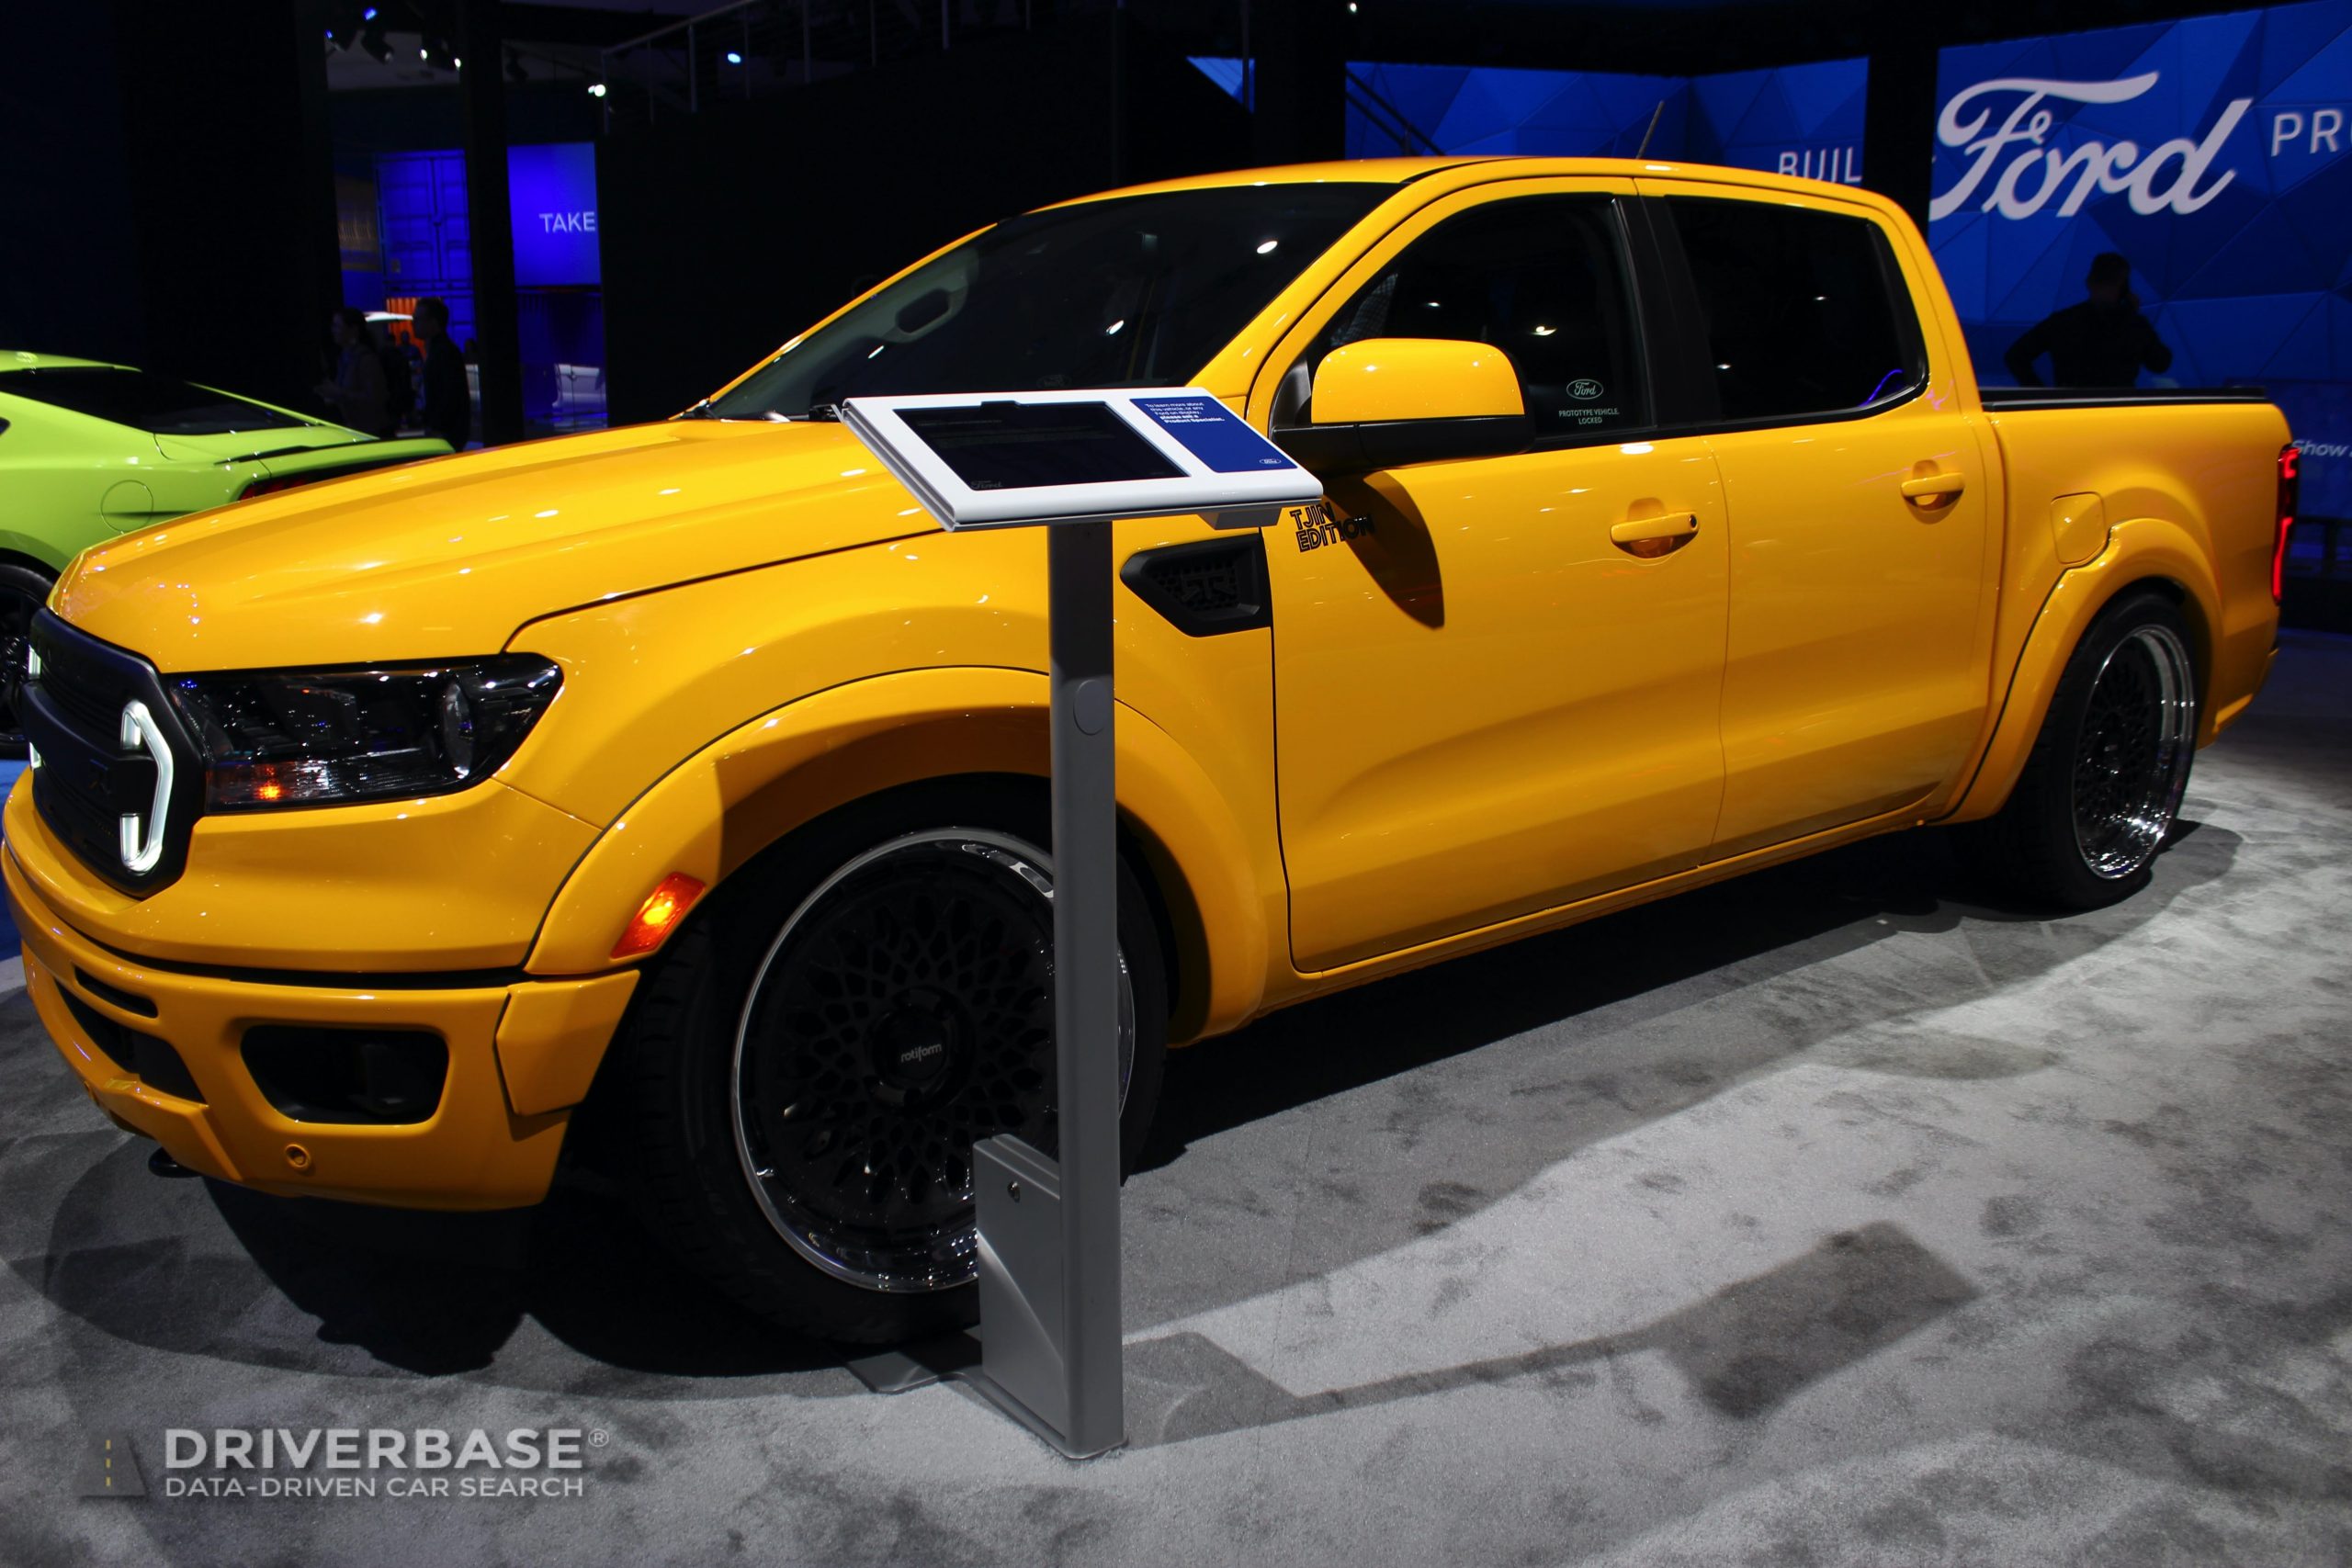 2020 Ford Ranger TJIN Edition at the Los Angeles Auto Show